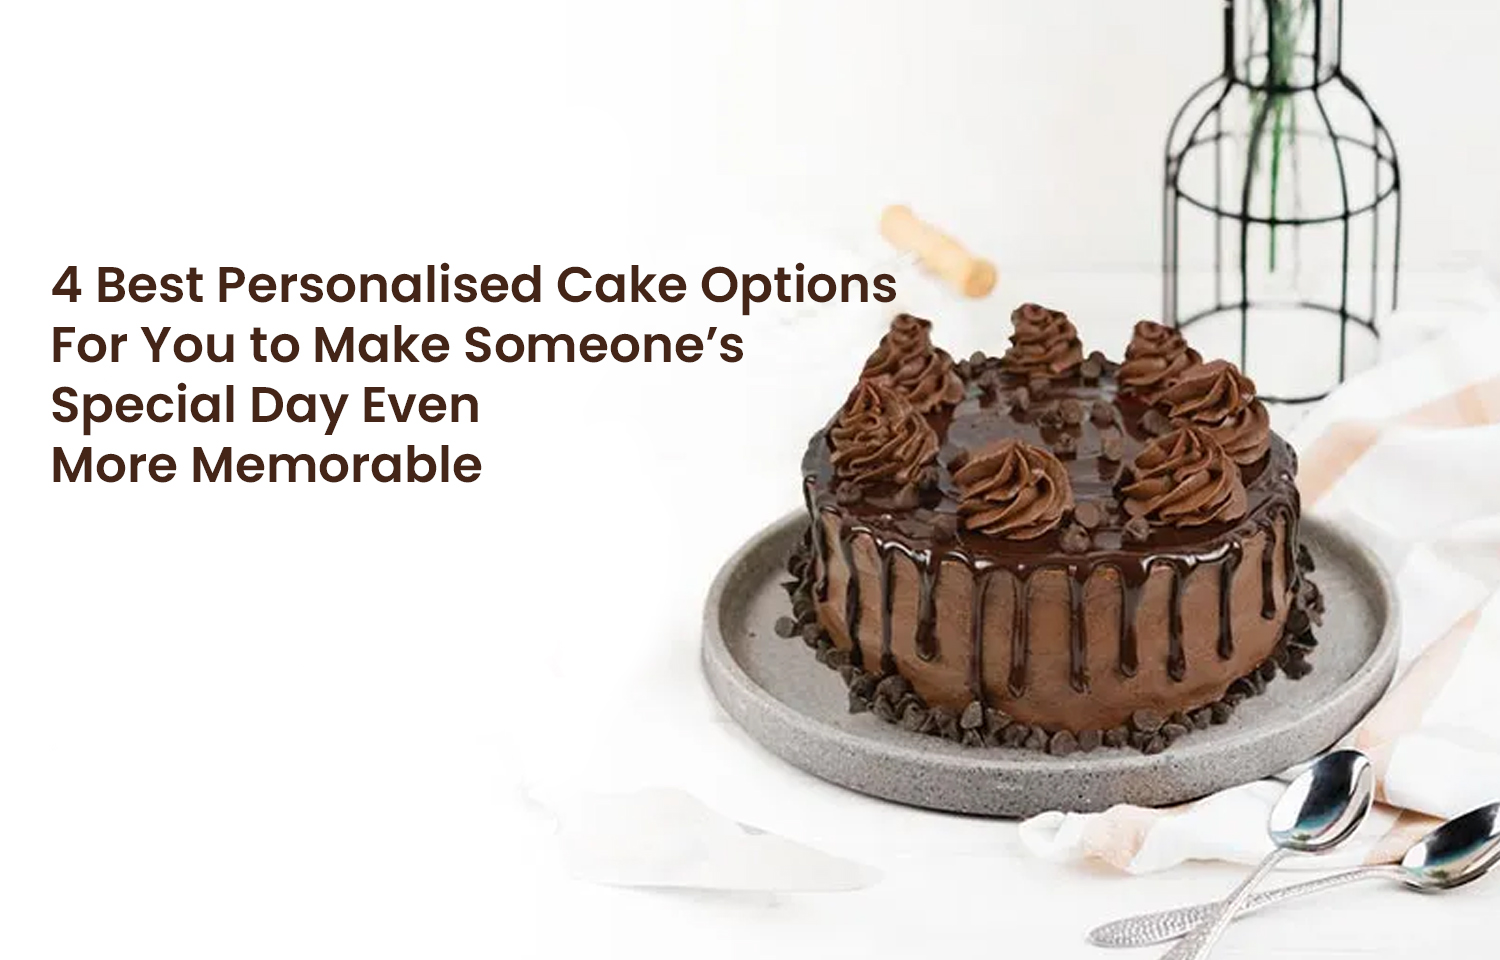 4 Best Personalised Cake Options For You to Make Someone’s Special Day Even More Memorable